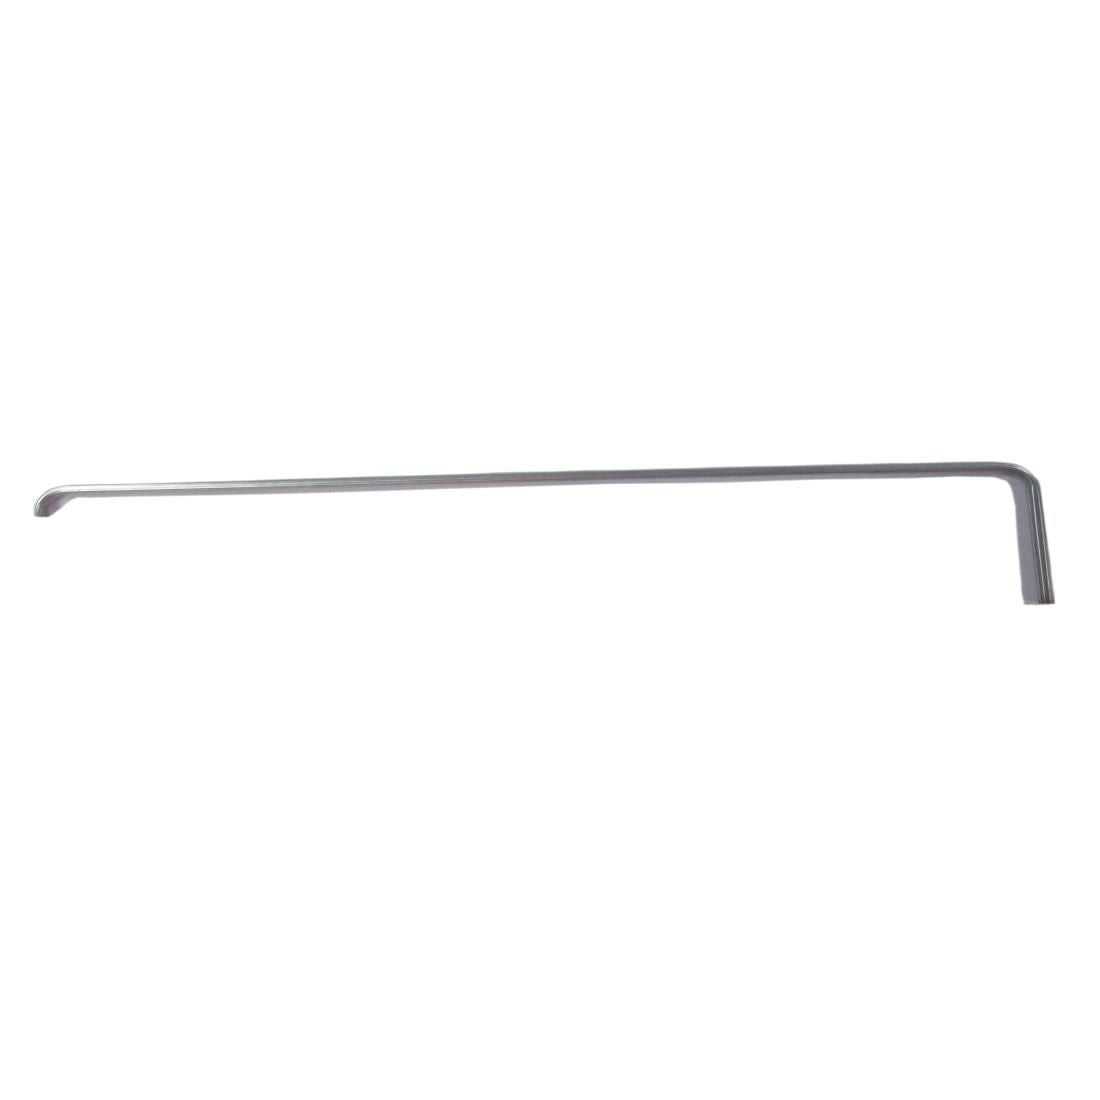 AG294 Thor Baffle Removal Tool for Freestanding Fryers